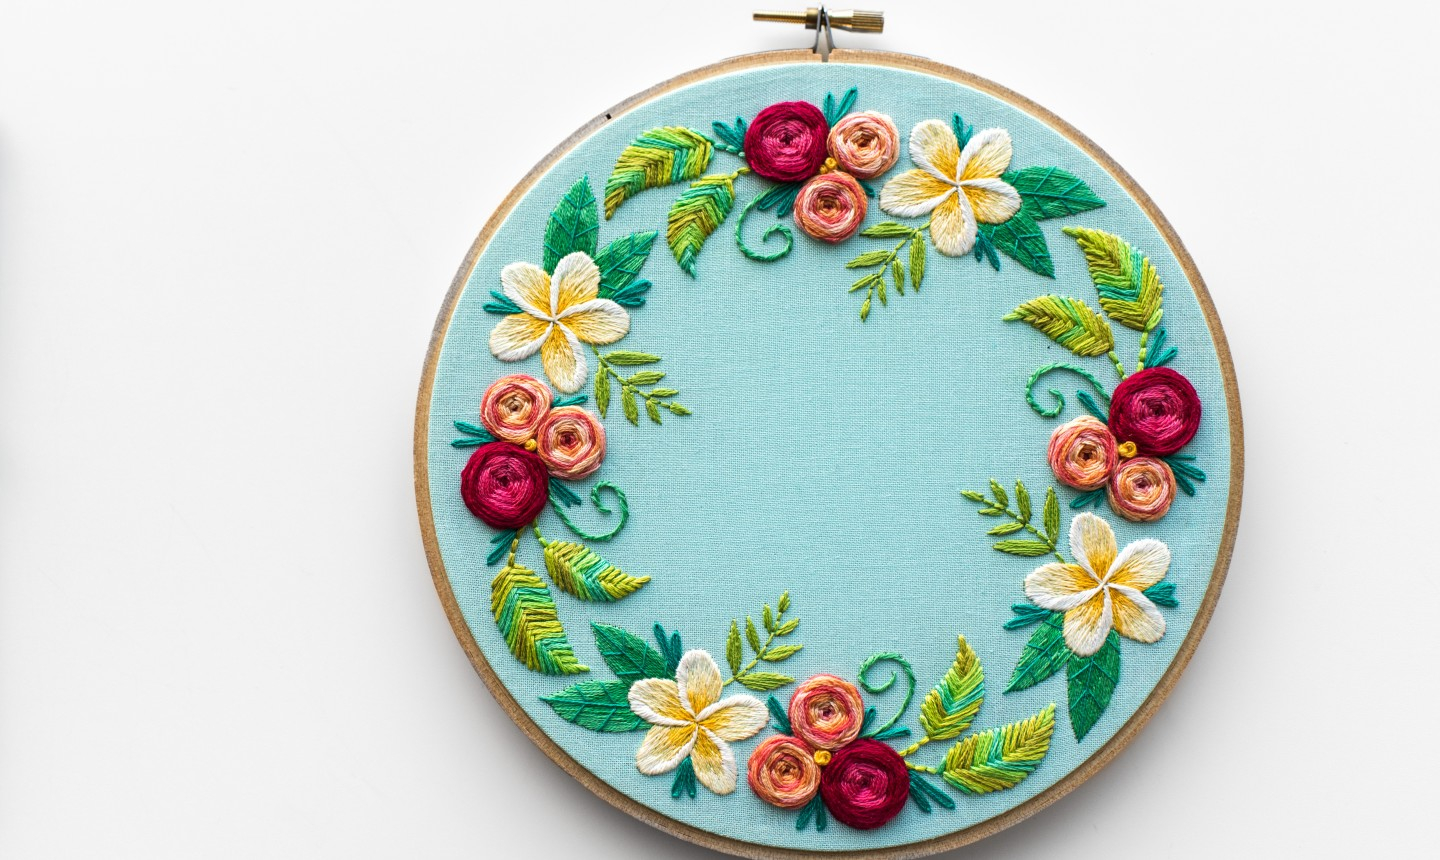 Mandala Embroidery Patterns 5 Beginner Hand Embroidery Projects